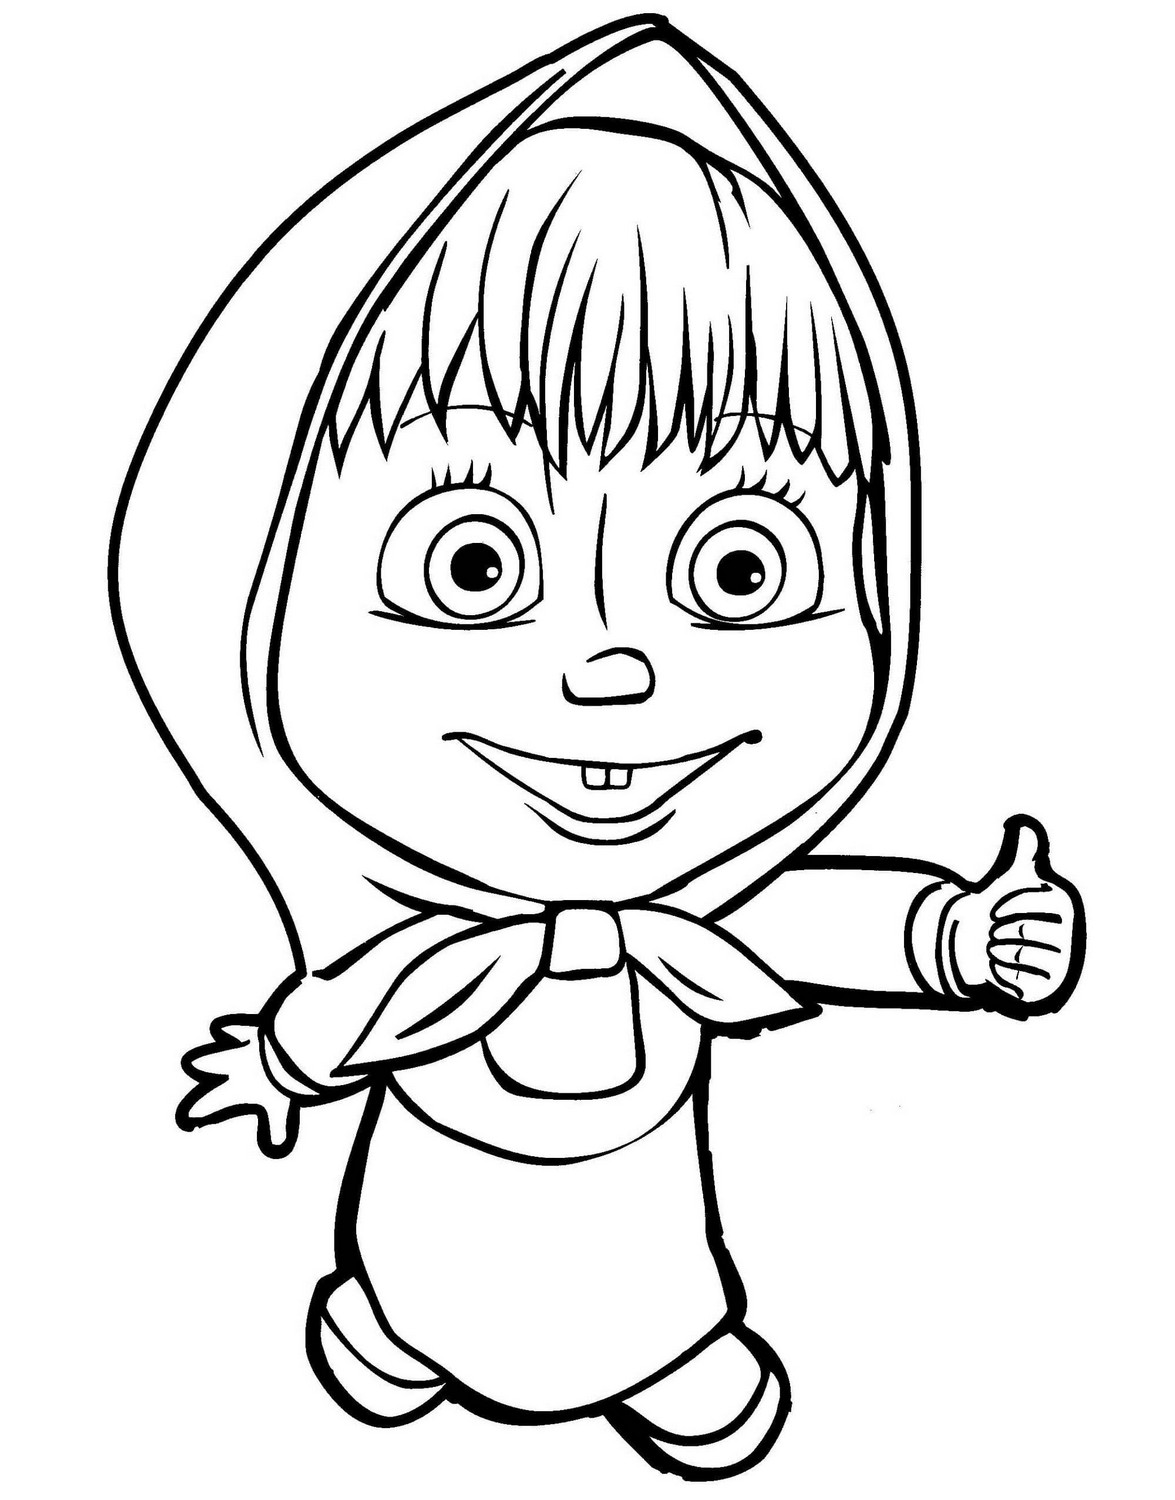 Drawing 47 of Masha and the Bear to print and color